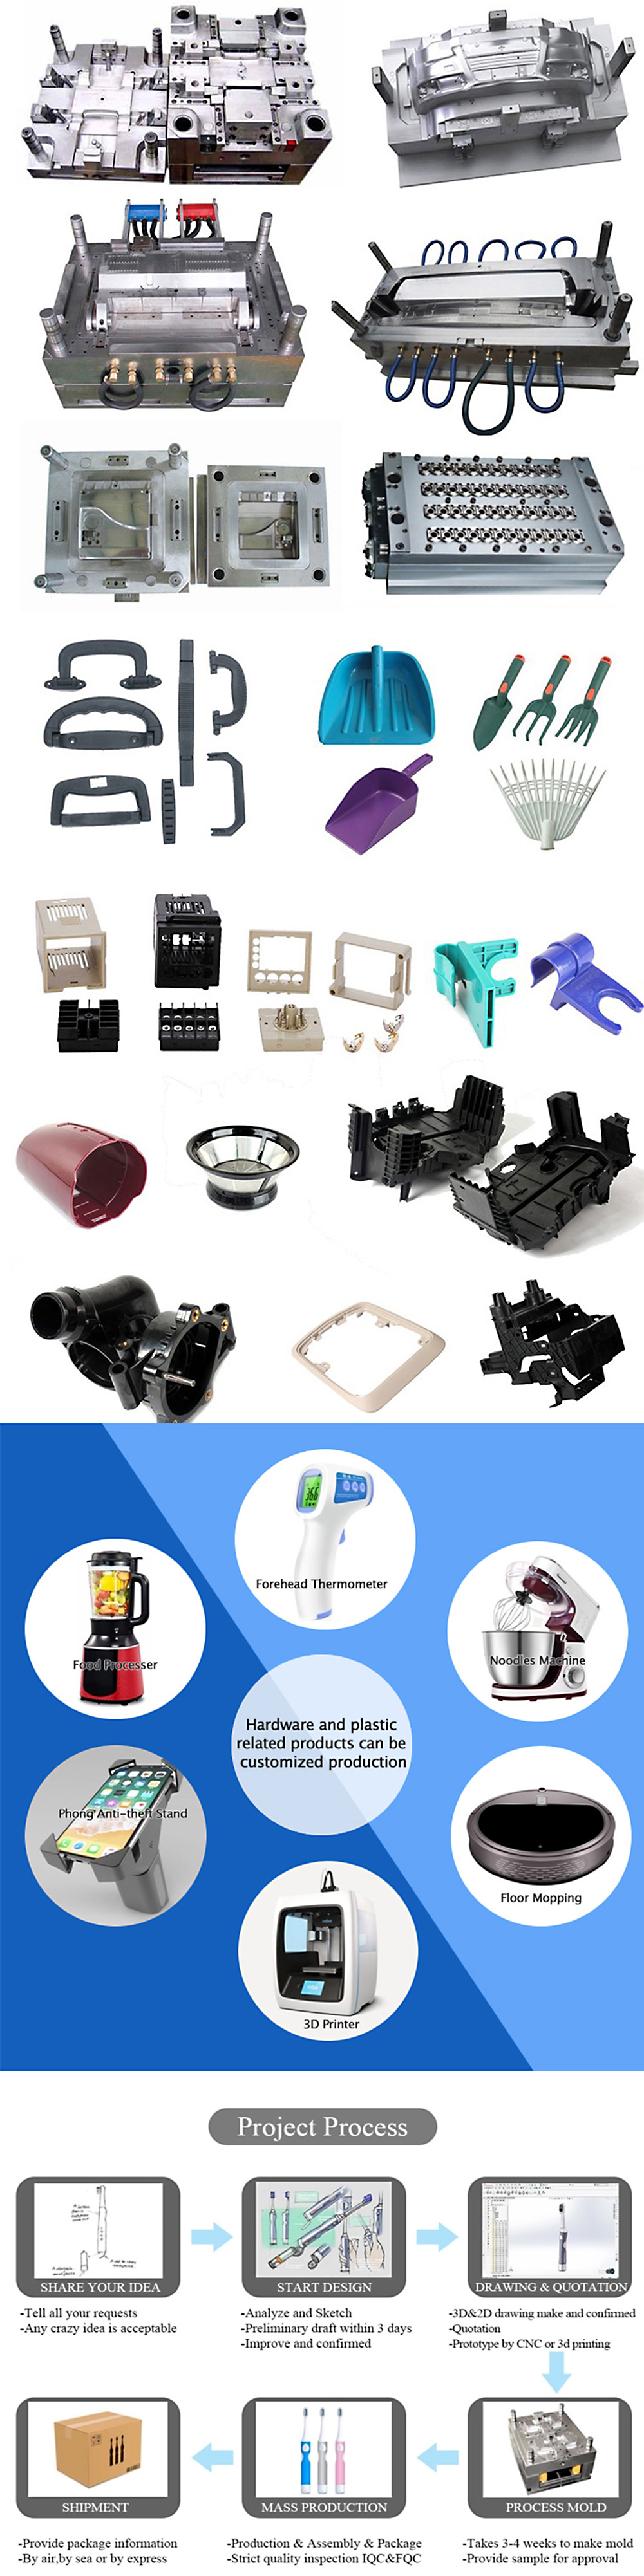 injection molding plastic logo | mold tooling plastic injection | custom plastic covers